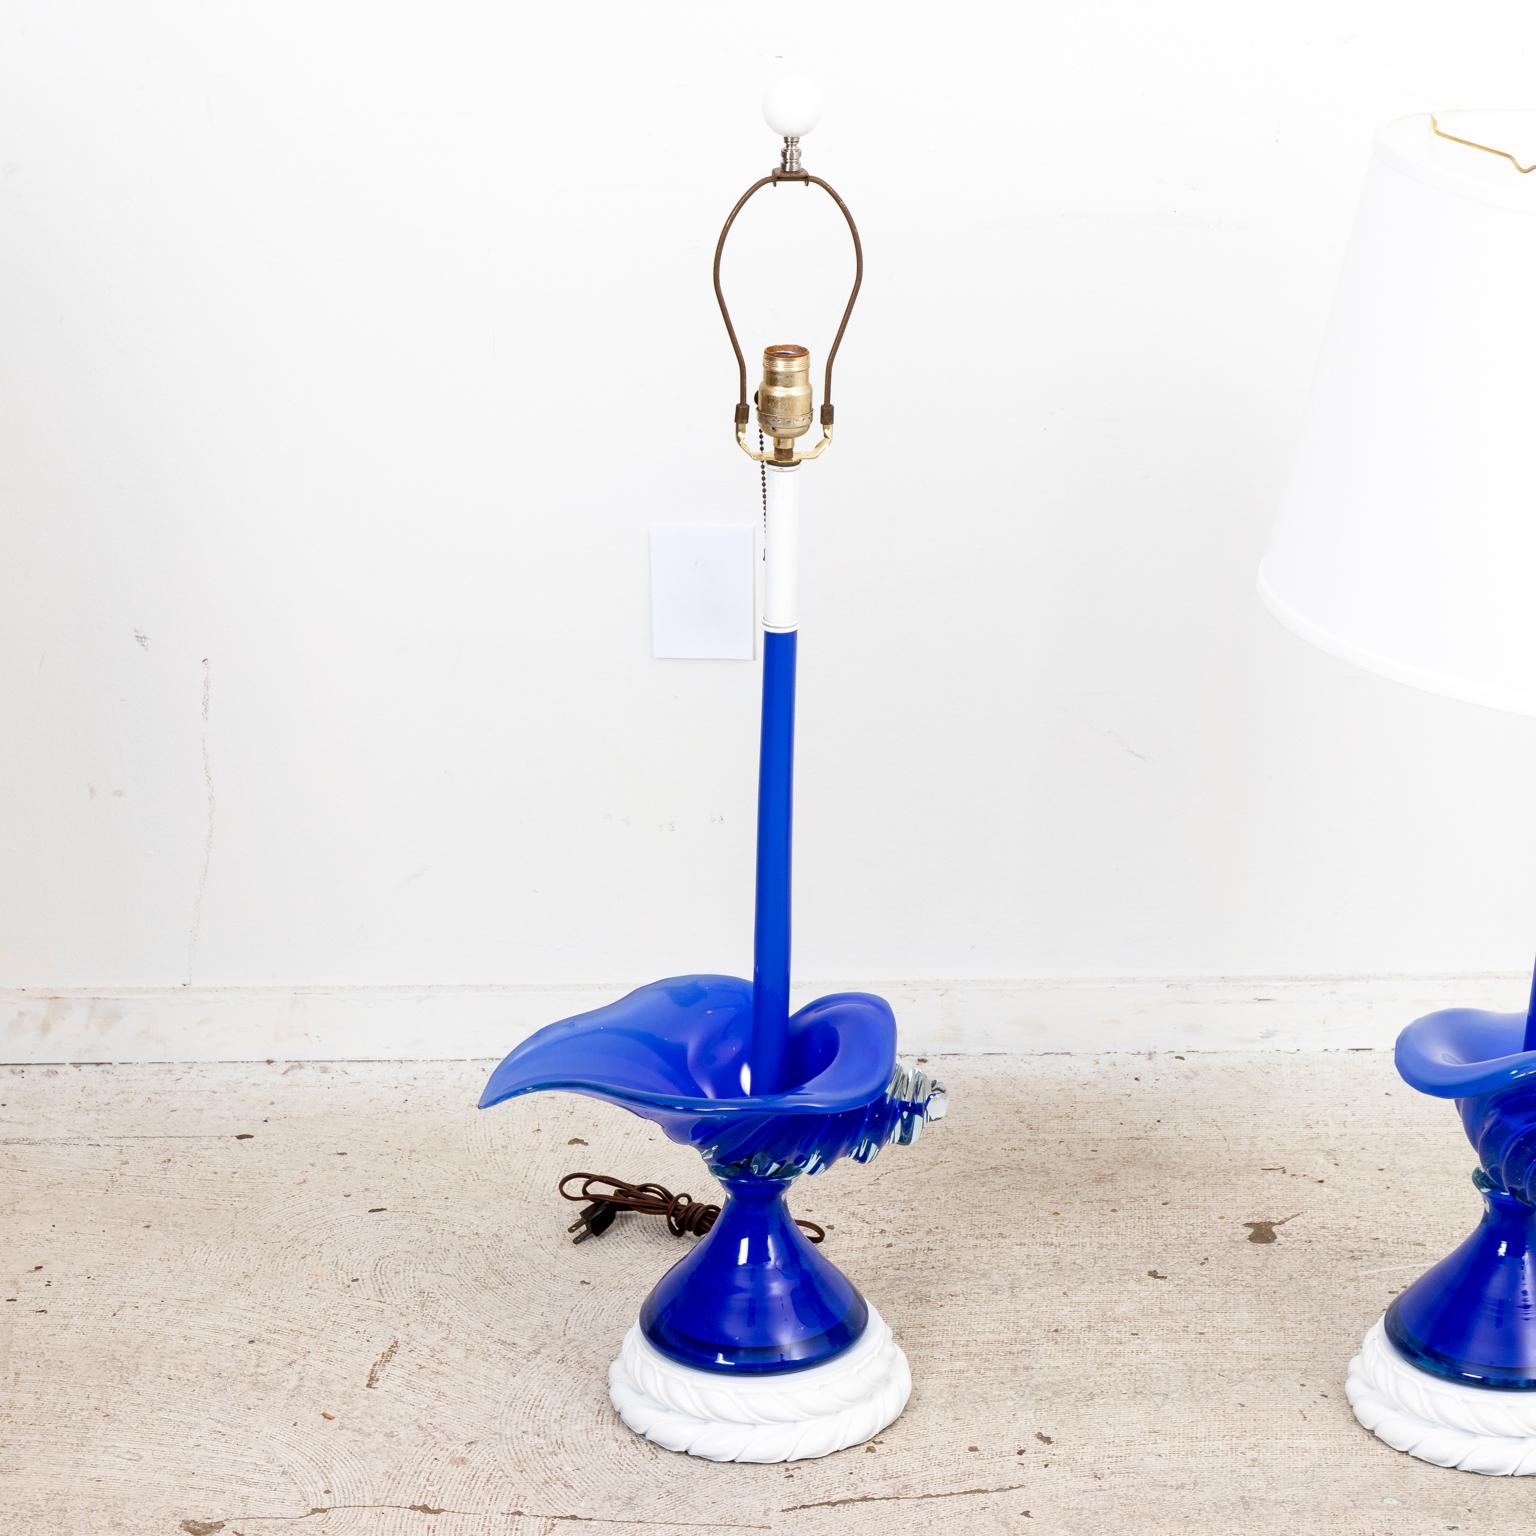 Pair of Mid-Century Modern style blue Murano glass table lamps in the shape of large Conch shells with contrasting round white color base with foliage trim. Shades not includes. Please note of wear consistent with age.